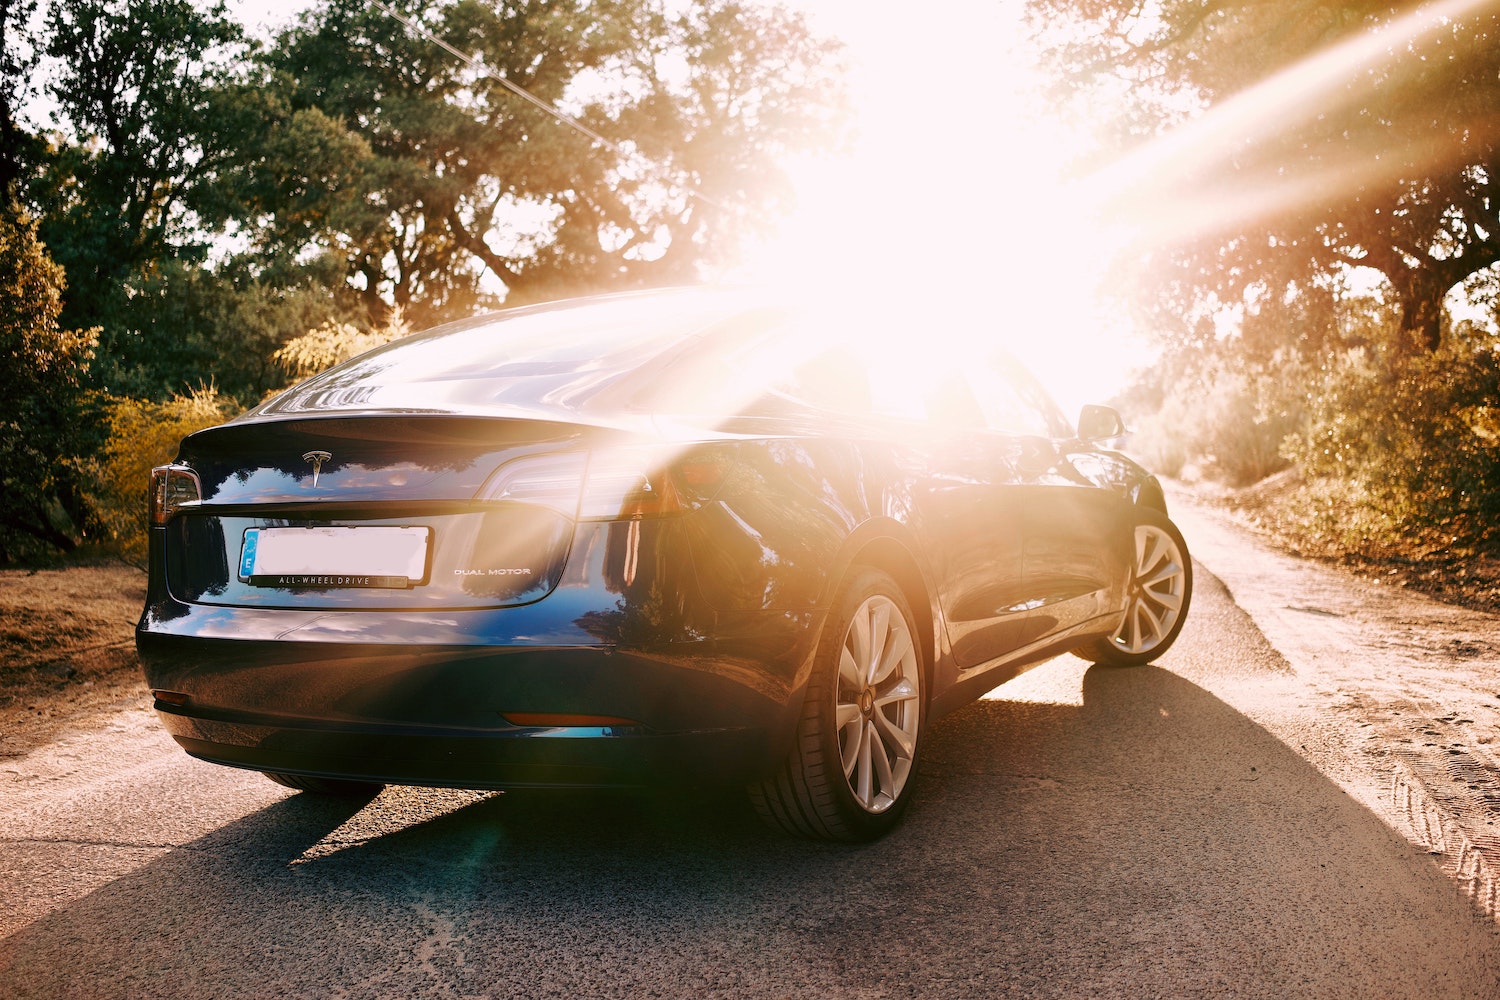 The automotive market is changing moving from fuel-based drives to electricity.